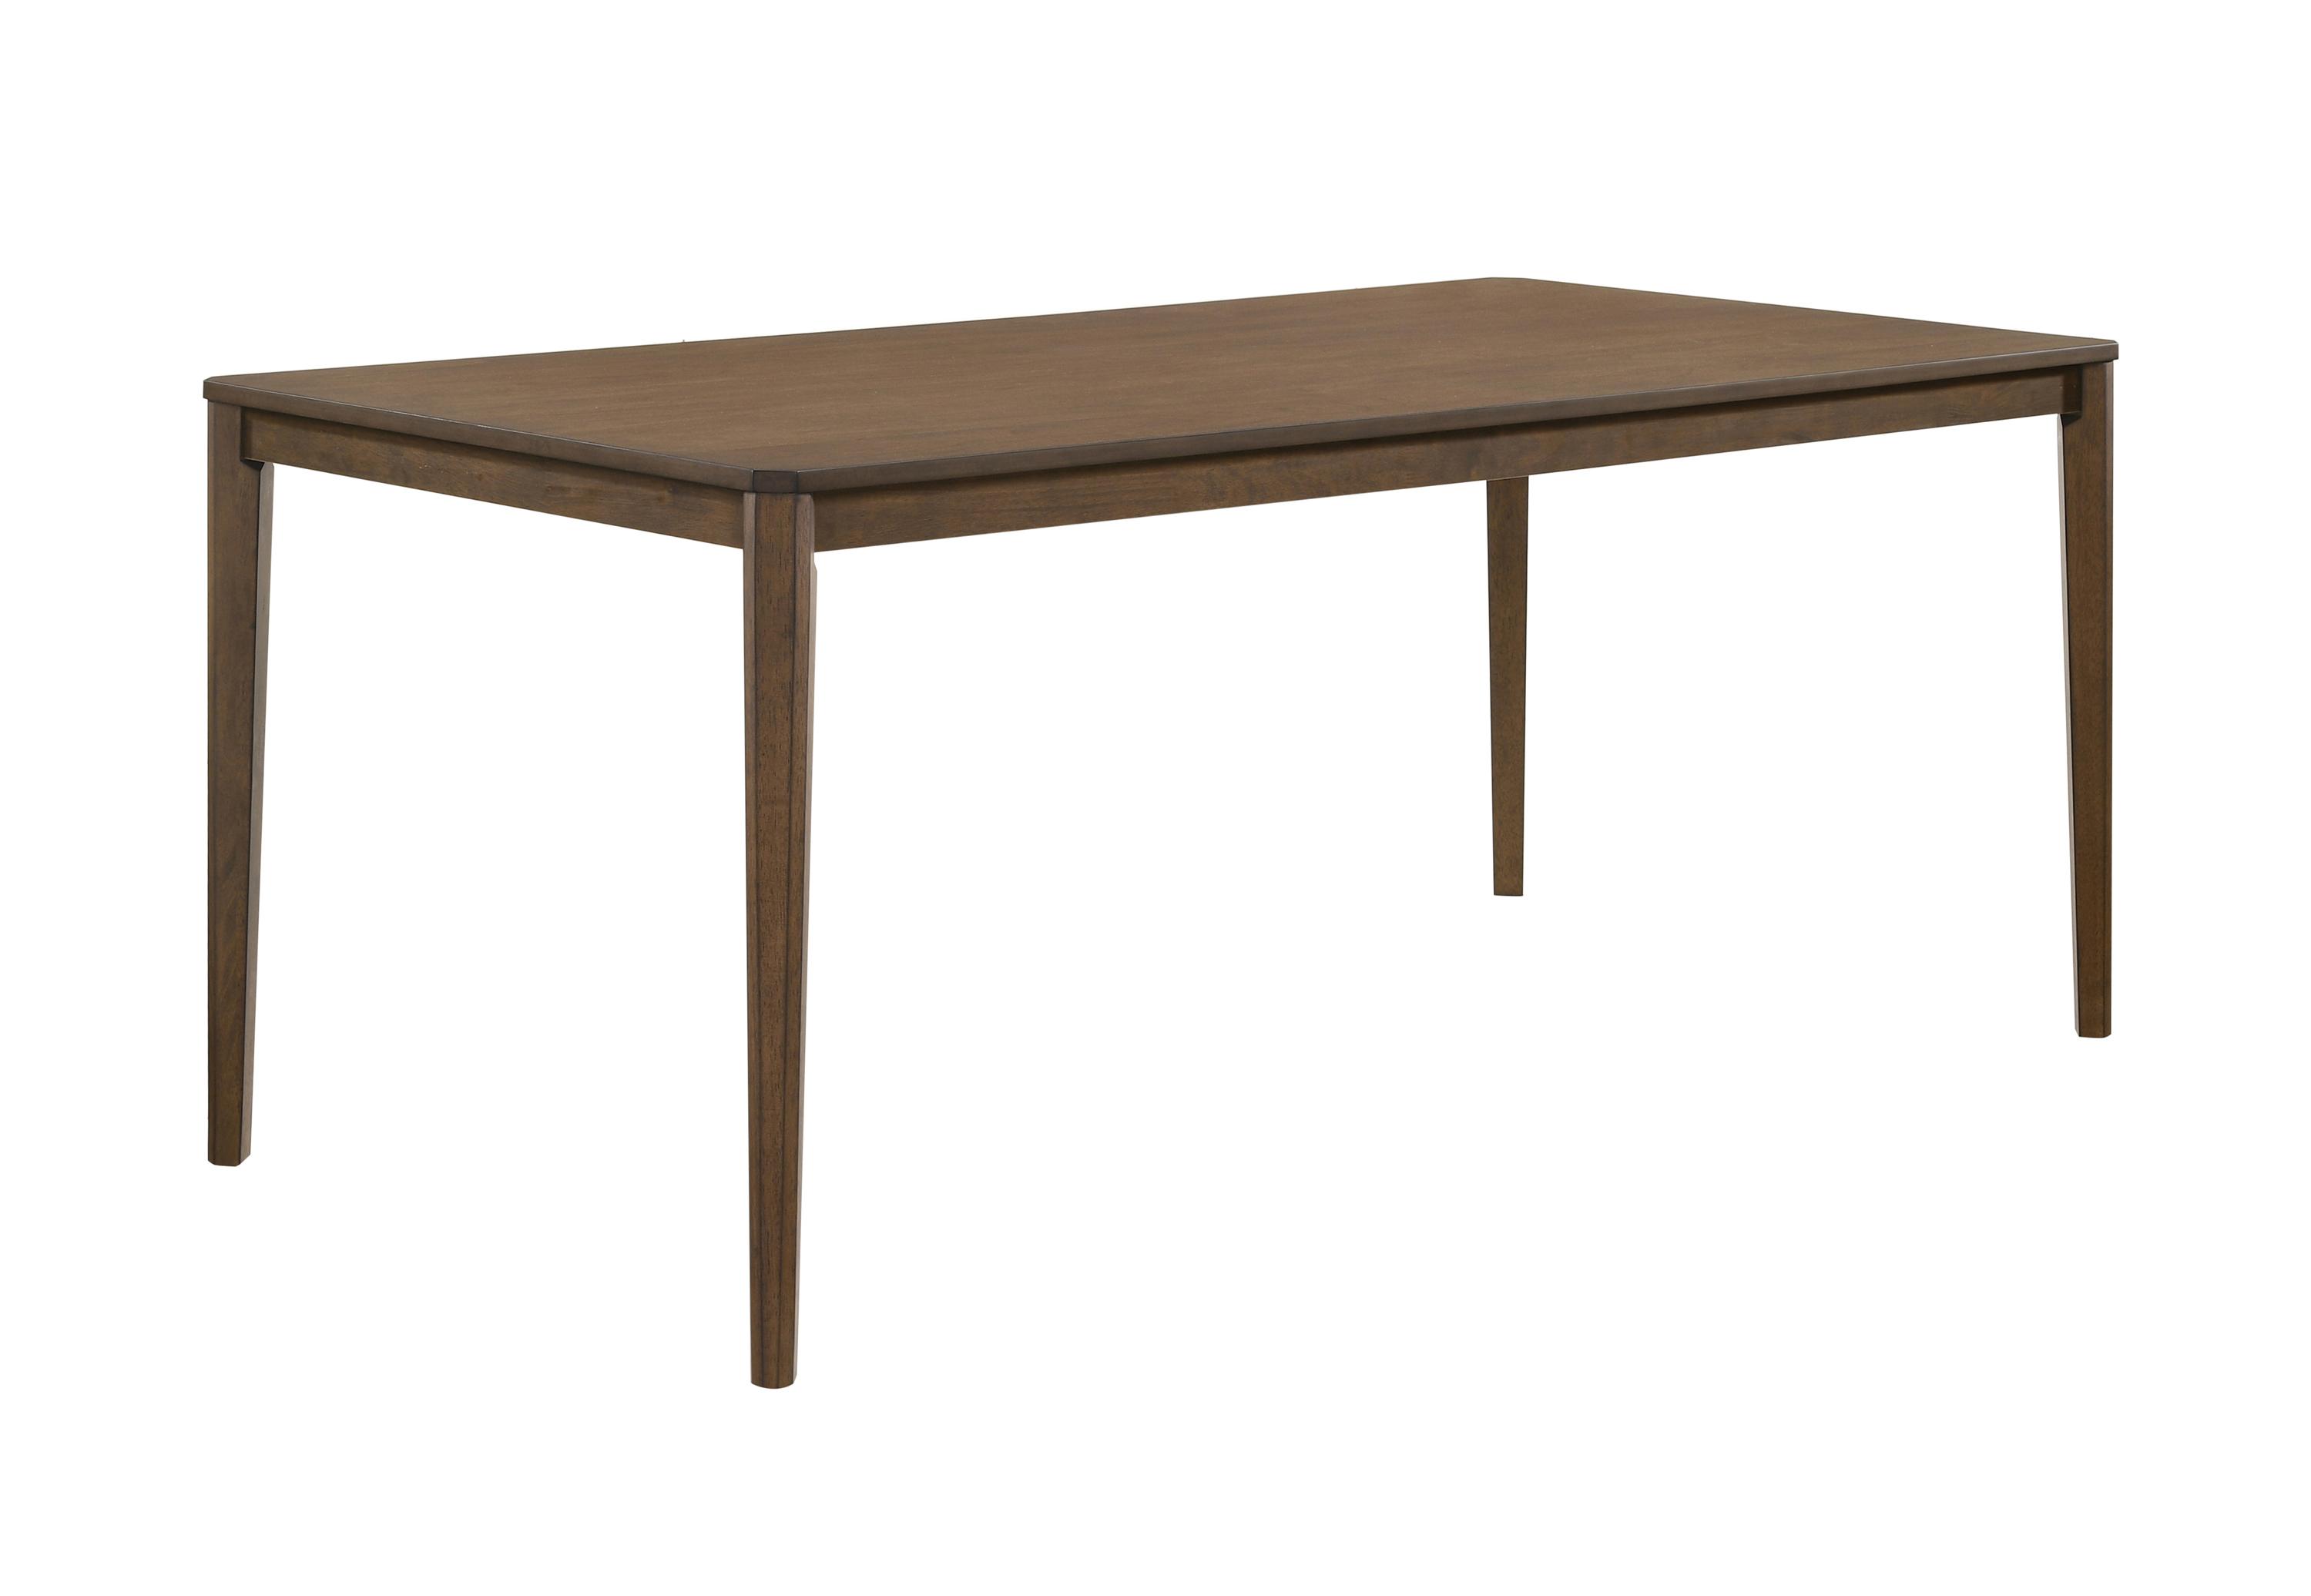 Transitional Dining Table 109841 Wethersfield 109841 in Walnut 